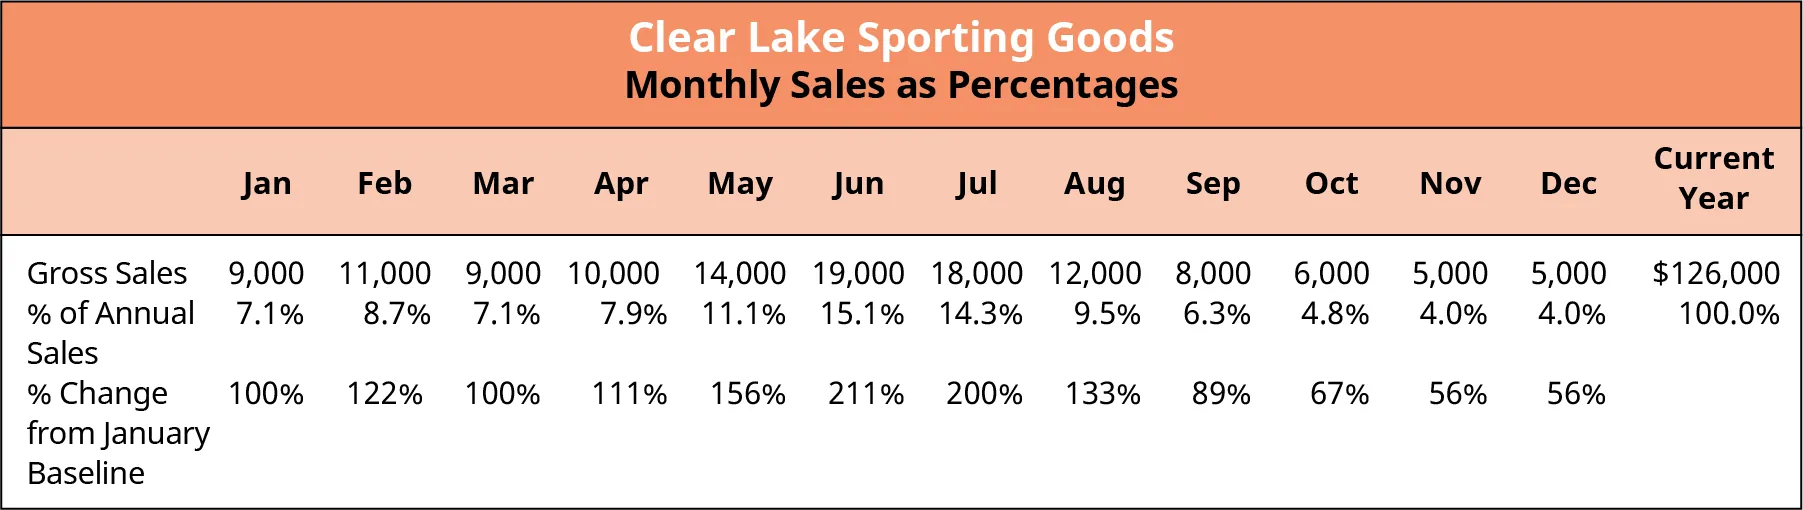 Historical Gross Sales Data as a percentage of Clear Lake Sporting Goods shows gross sales for each month as both a dollar value and a percentage of annual sales. The sales from January are used as a baseline, and the percentage change in sales is calculated, comparing each month's sales to January's sales.